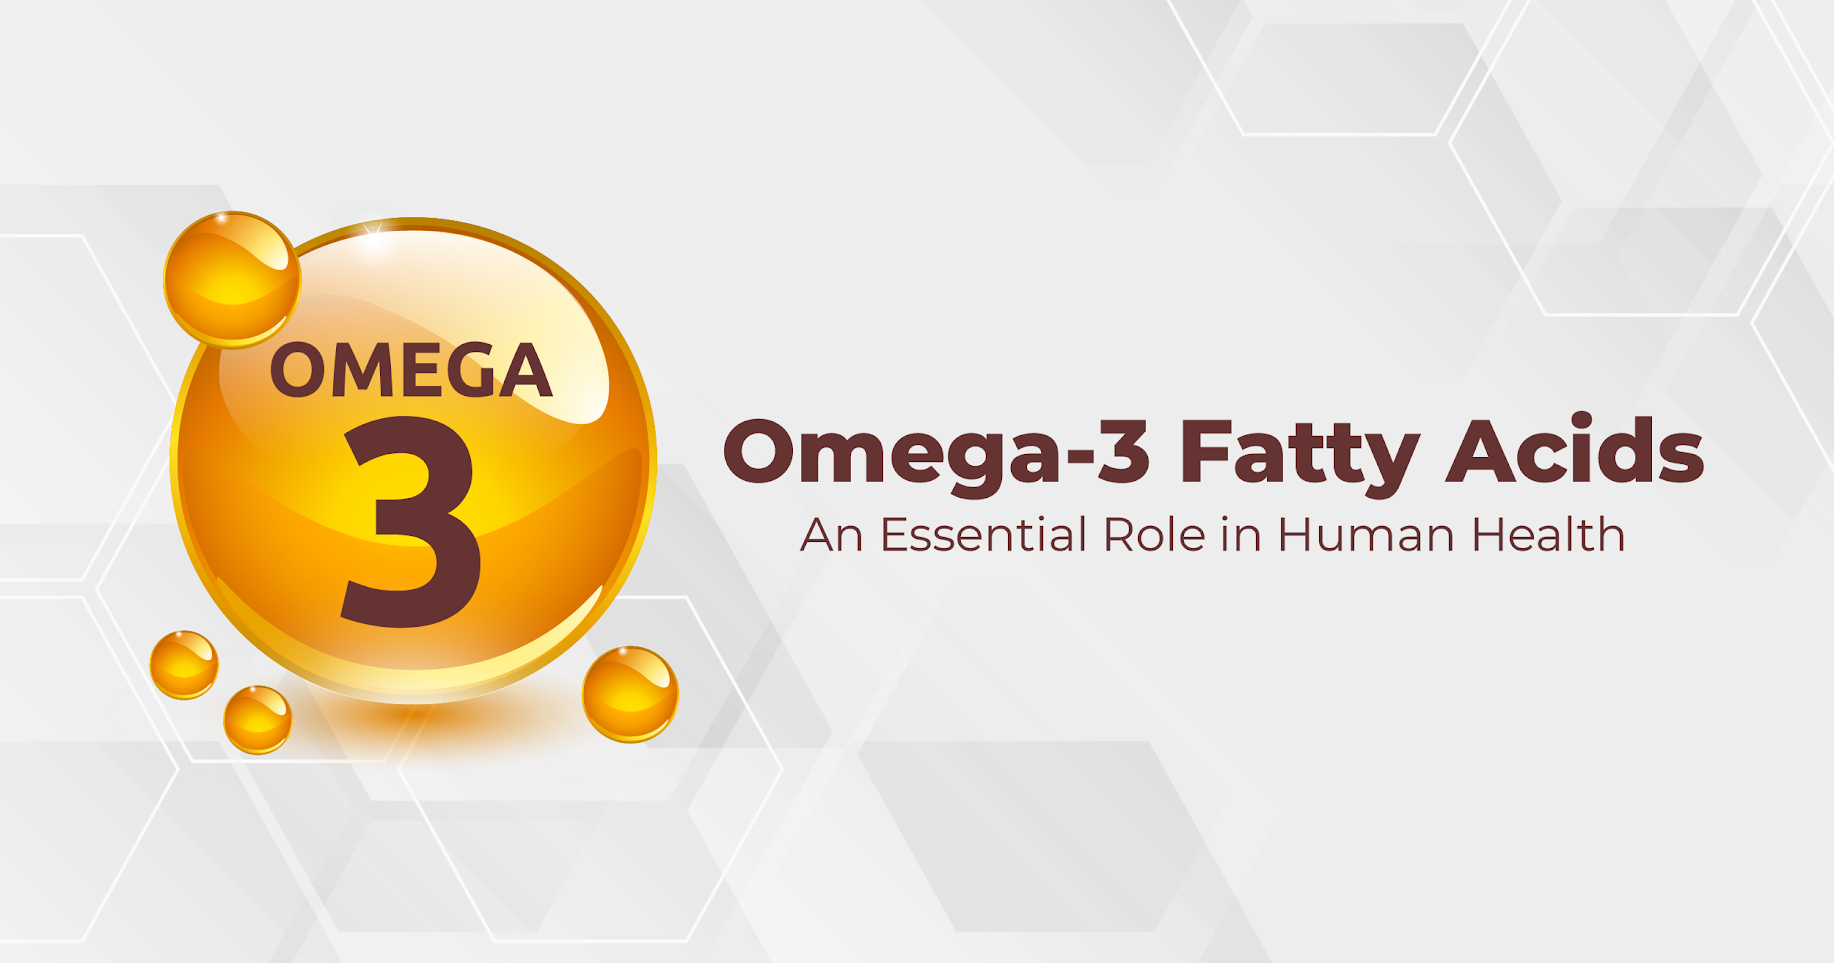 Omega-3 Fatty Acids - An Essential Role in Human Health